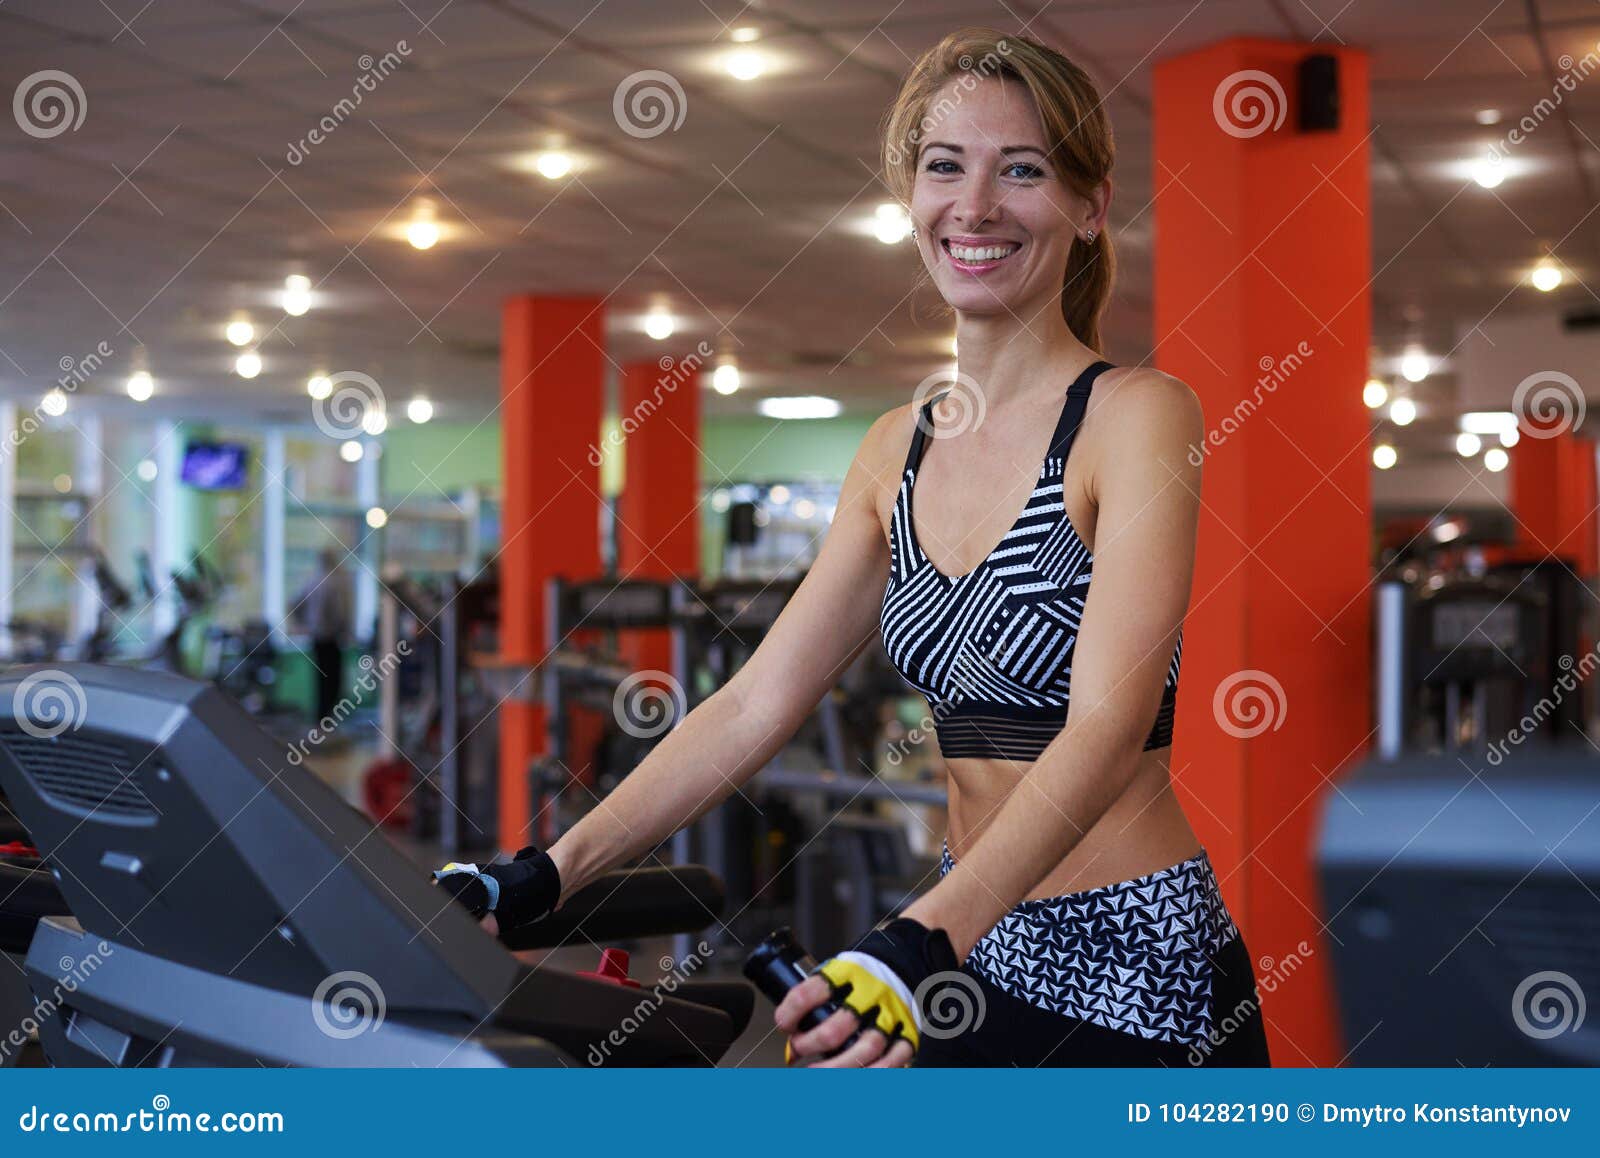 Smiling Sportive Woman Walking on Treadmill Stock Photo - Image of ...